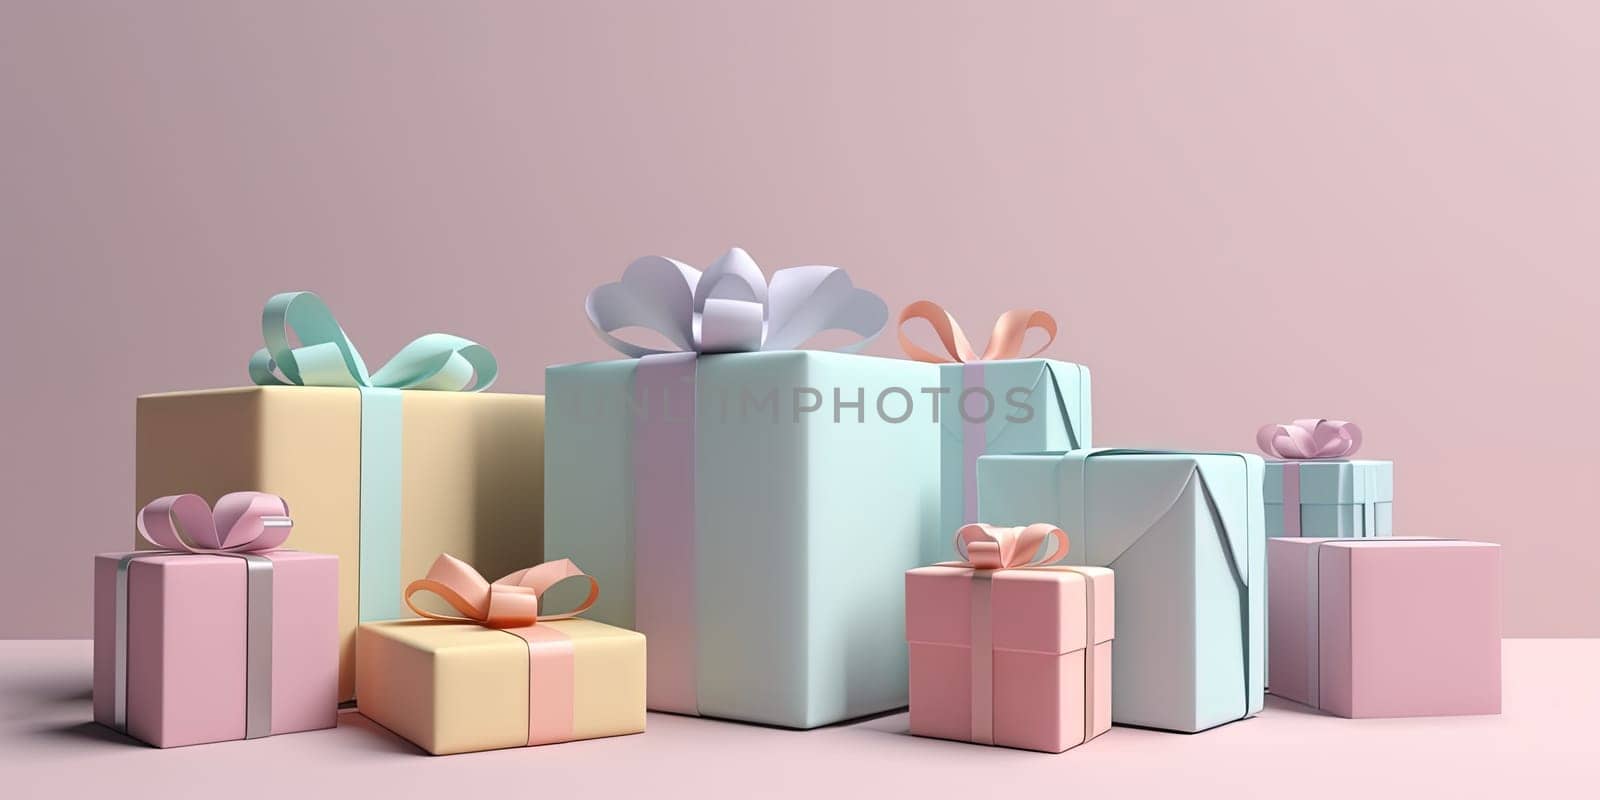 3D Illustration Gift Boxes With Bow In Pastel Colors by tan4ikk1